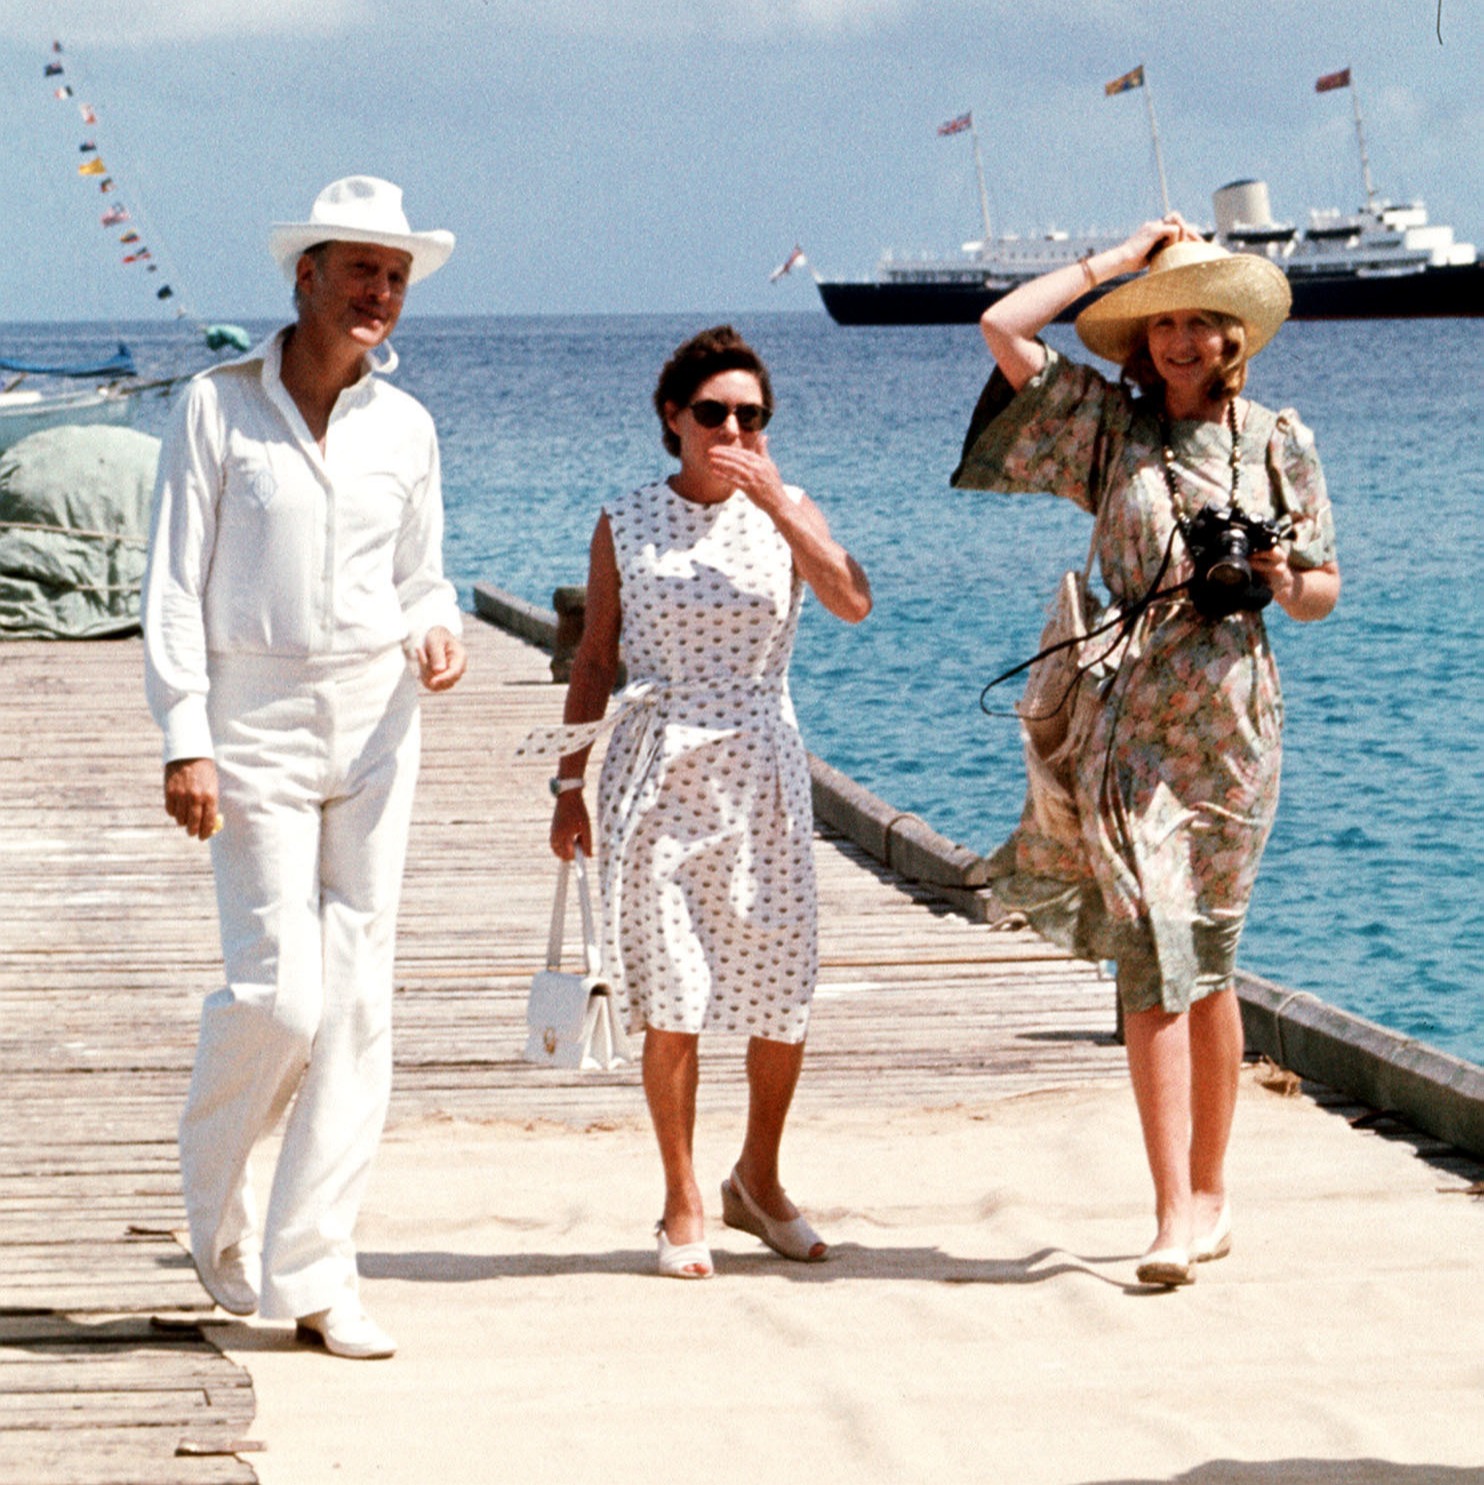 The princess, pictured centre, and her friends Lord Colin Tennant and Lady Anne Tennant are seen waiting on the jetty at Mustique to greet the Queen during her Silver Jubilee tour of the West Indies